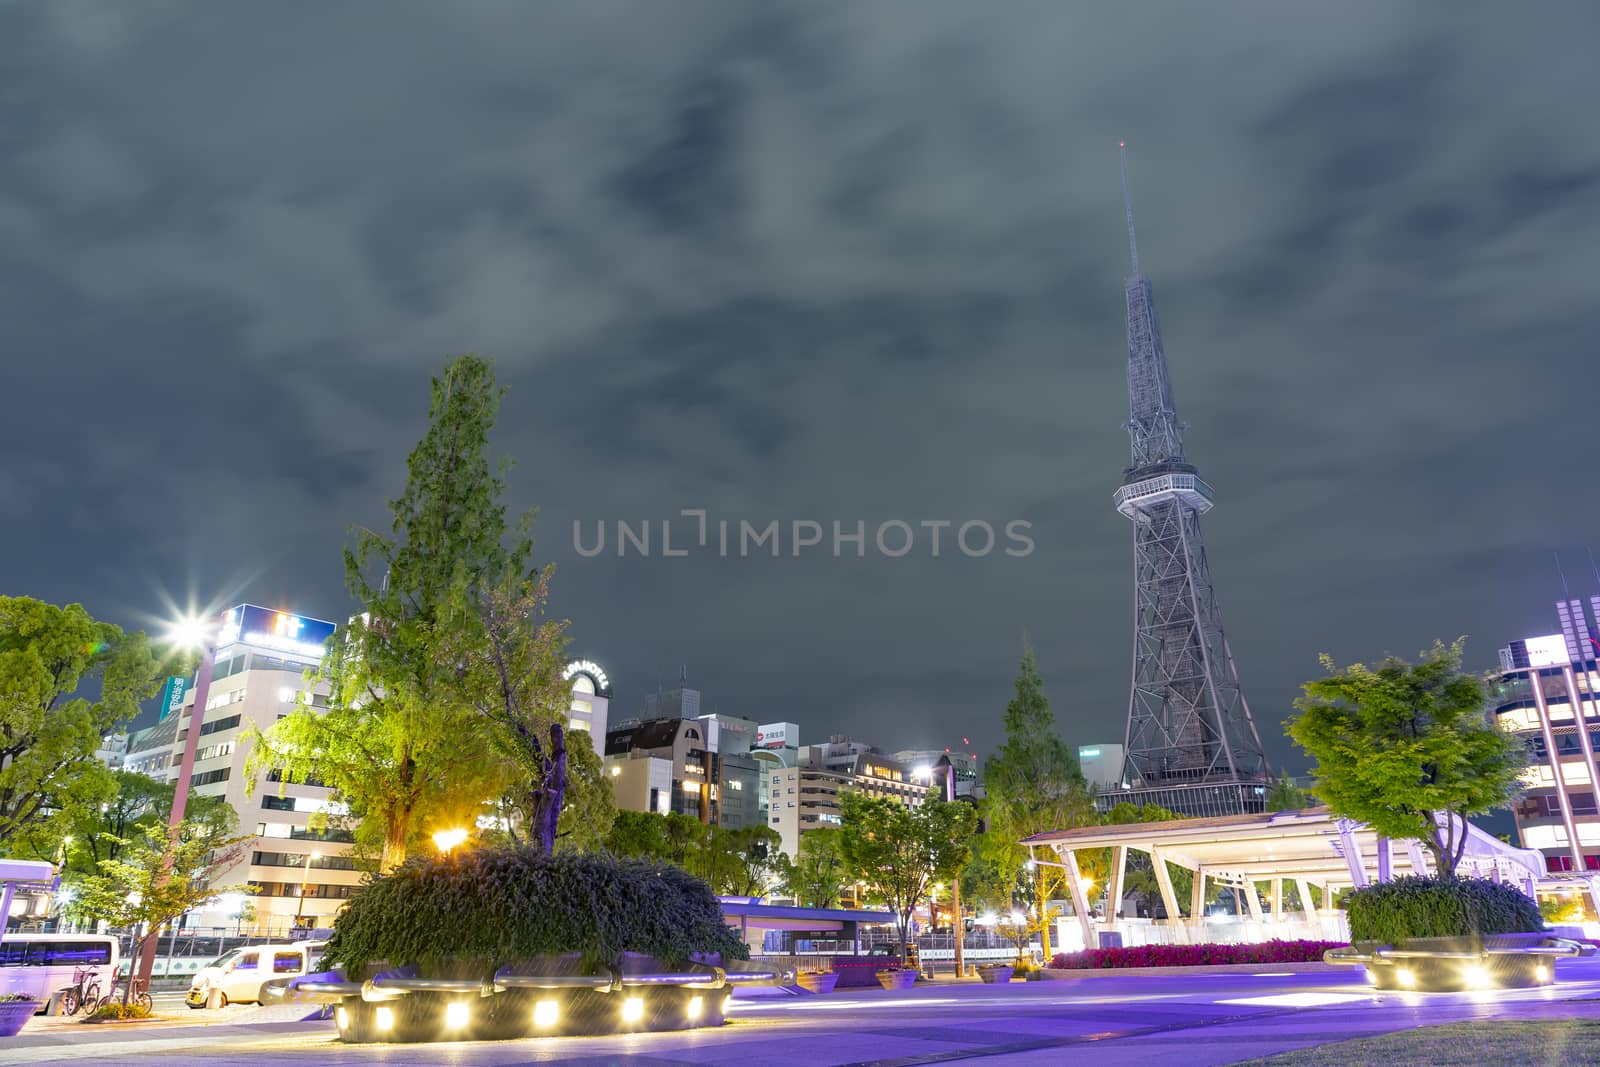 NAGOYA, JAPAN - April 26, 2019: Cityscape at night of  Nagoya TV Tower, the first consolidated radio tower built in Japan, finished on June 19, 1954. located at the center of Nagoya in Hisaya Odori Park in Sakae. It is a landmark of the city.